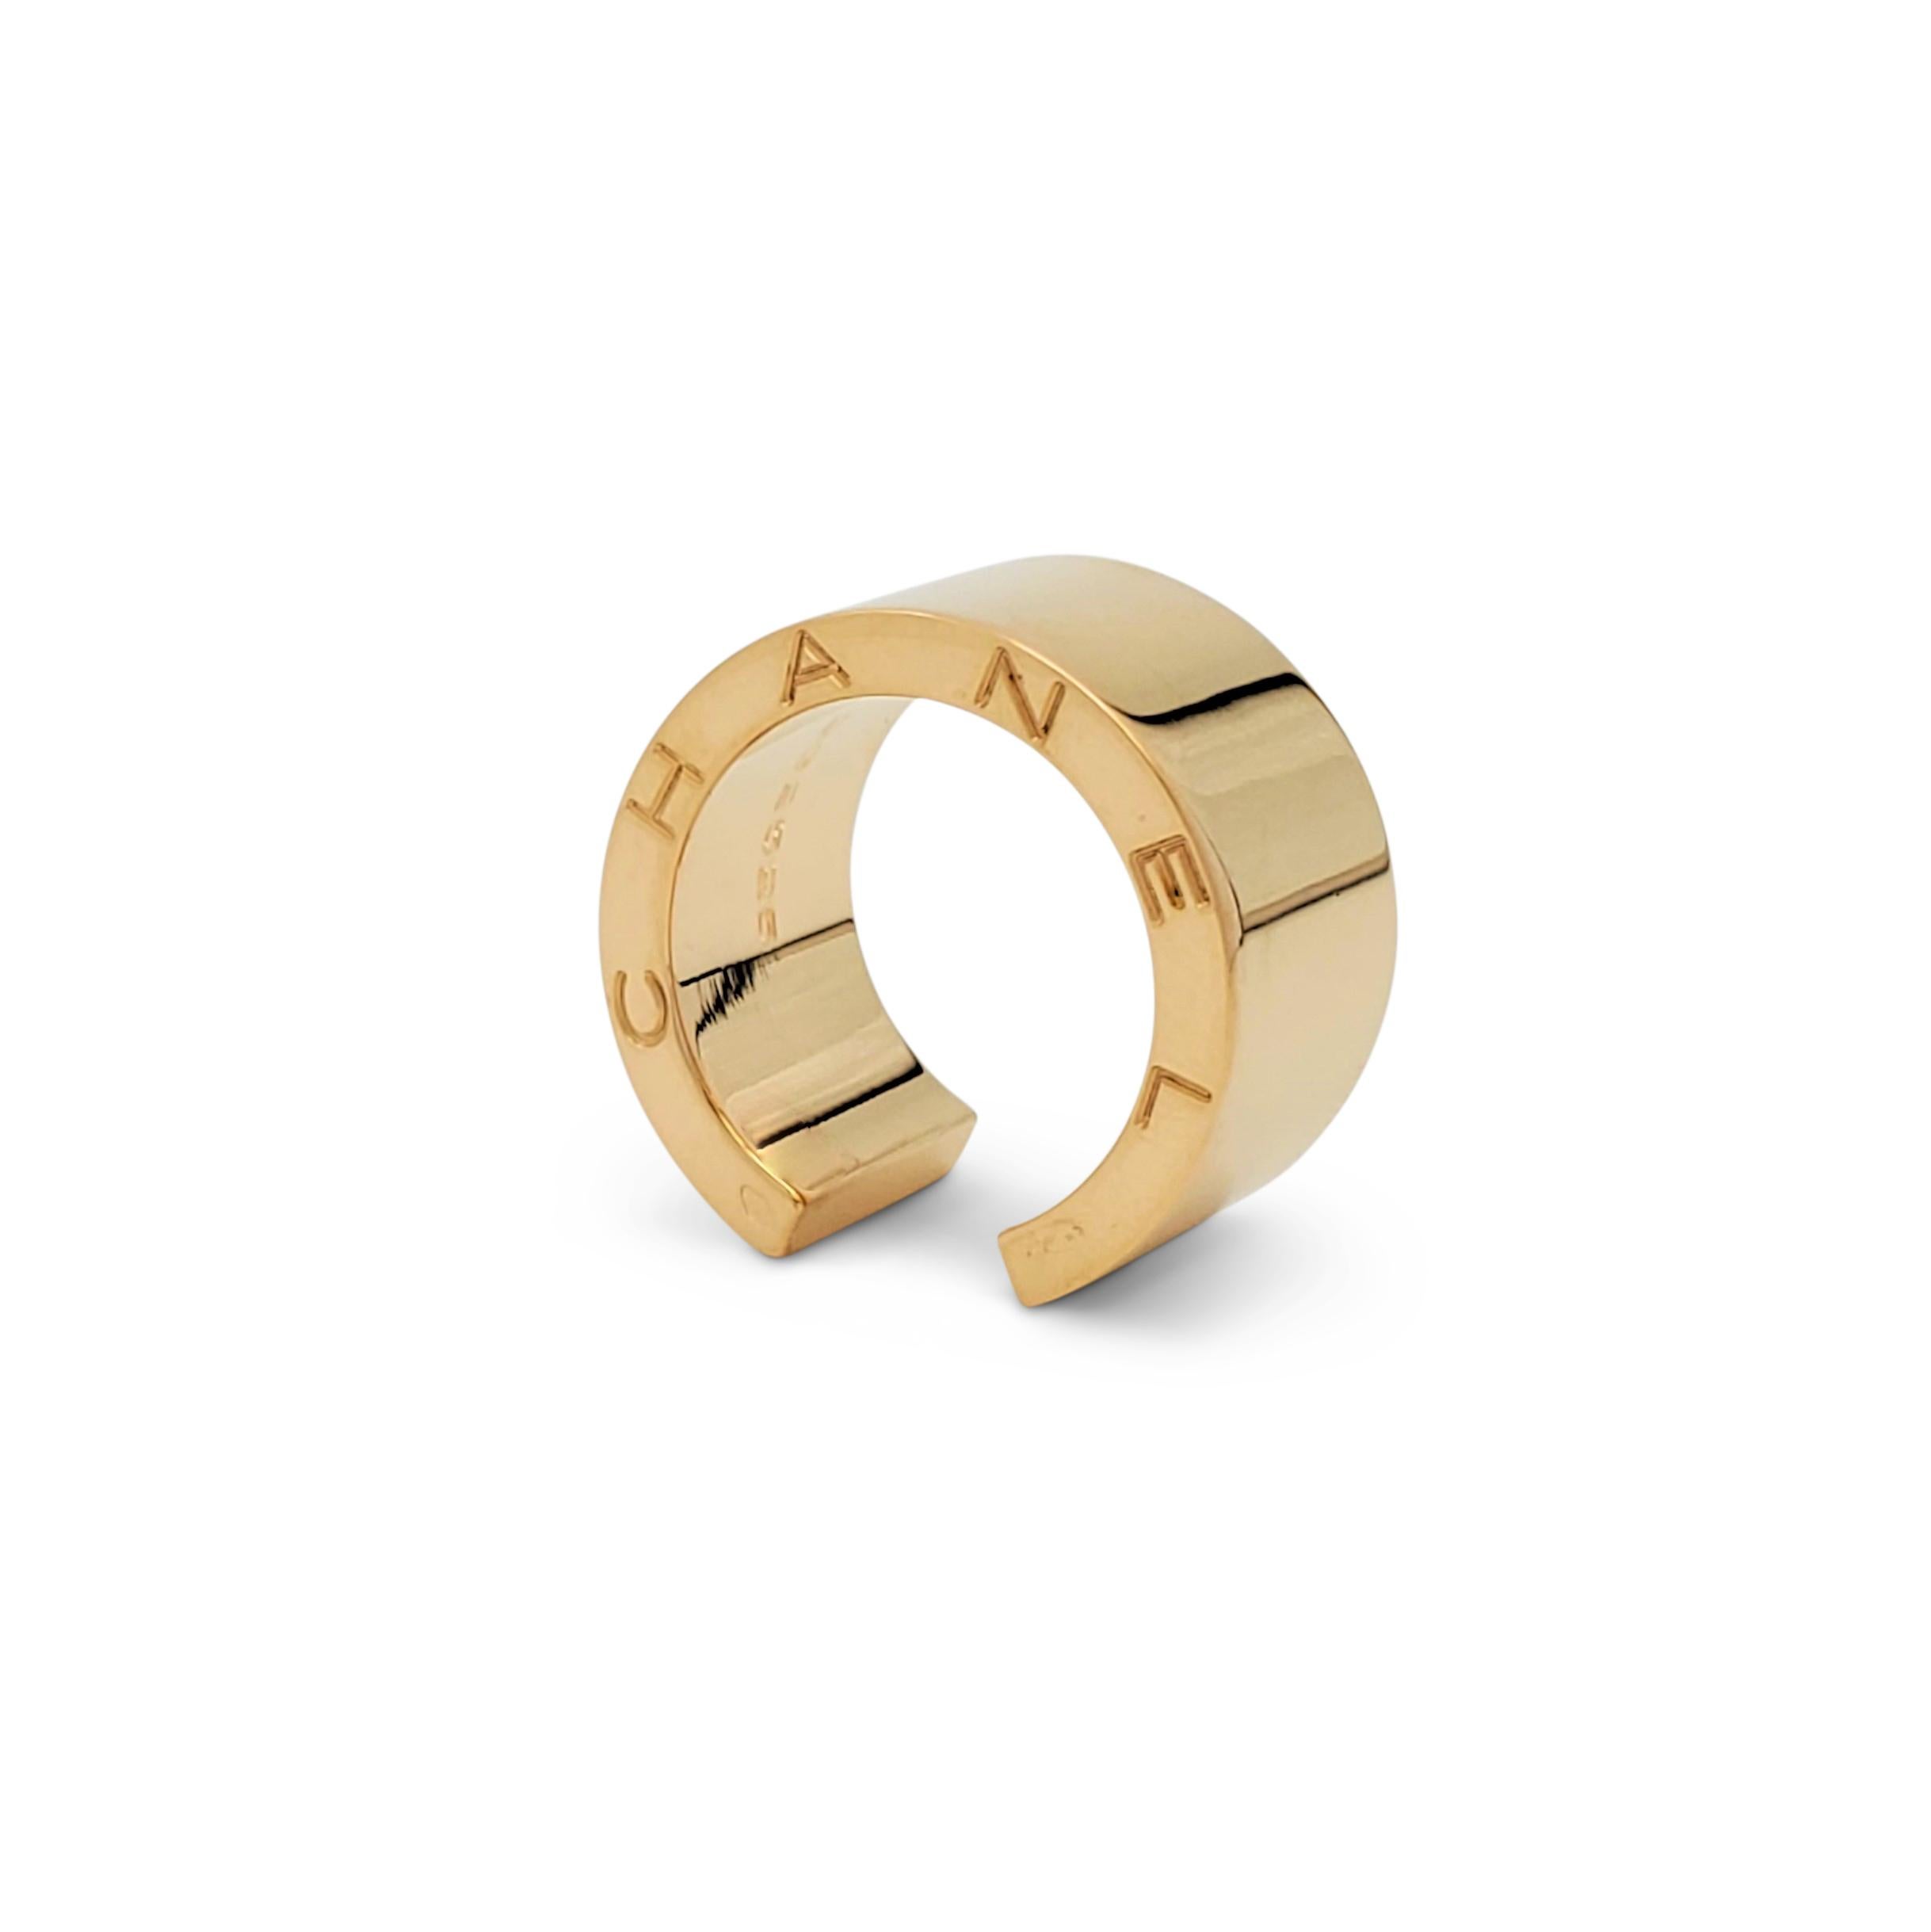 Authentic chic and understated Chanel 'C Signature' open band ring crafted in 18 karat yellow gold. Signed Chanel, 750, with serial number and French hallmarks. The ring is not presented with the original box or papers. CIRCA 2010s.

Ring Size: US